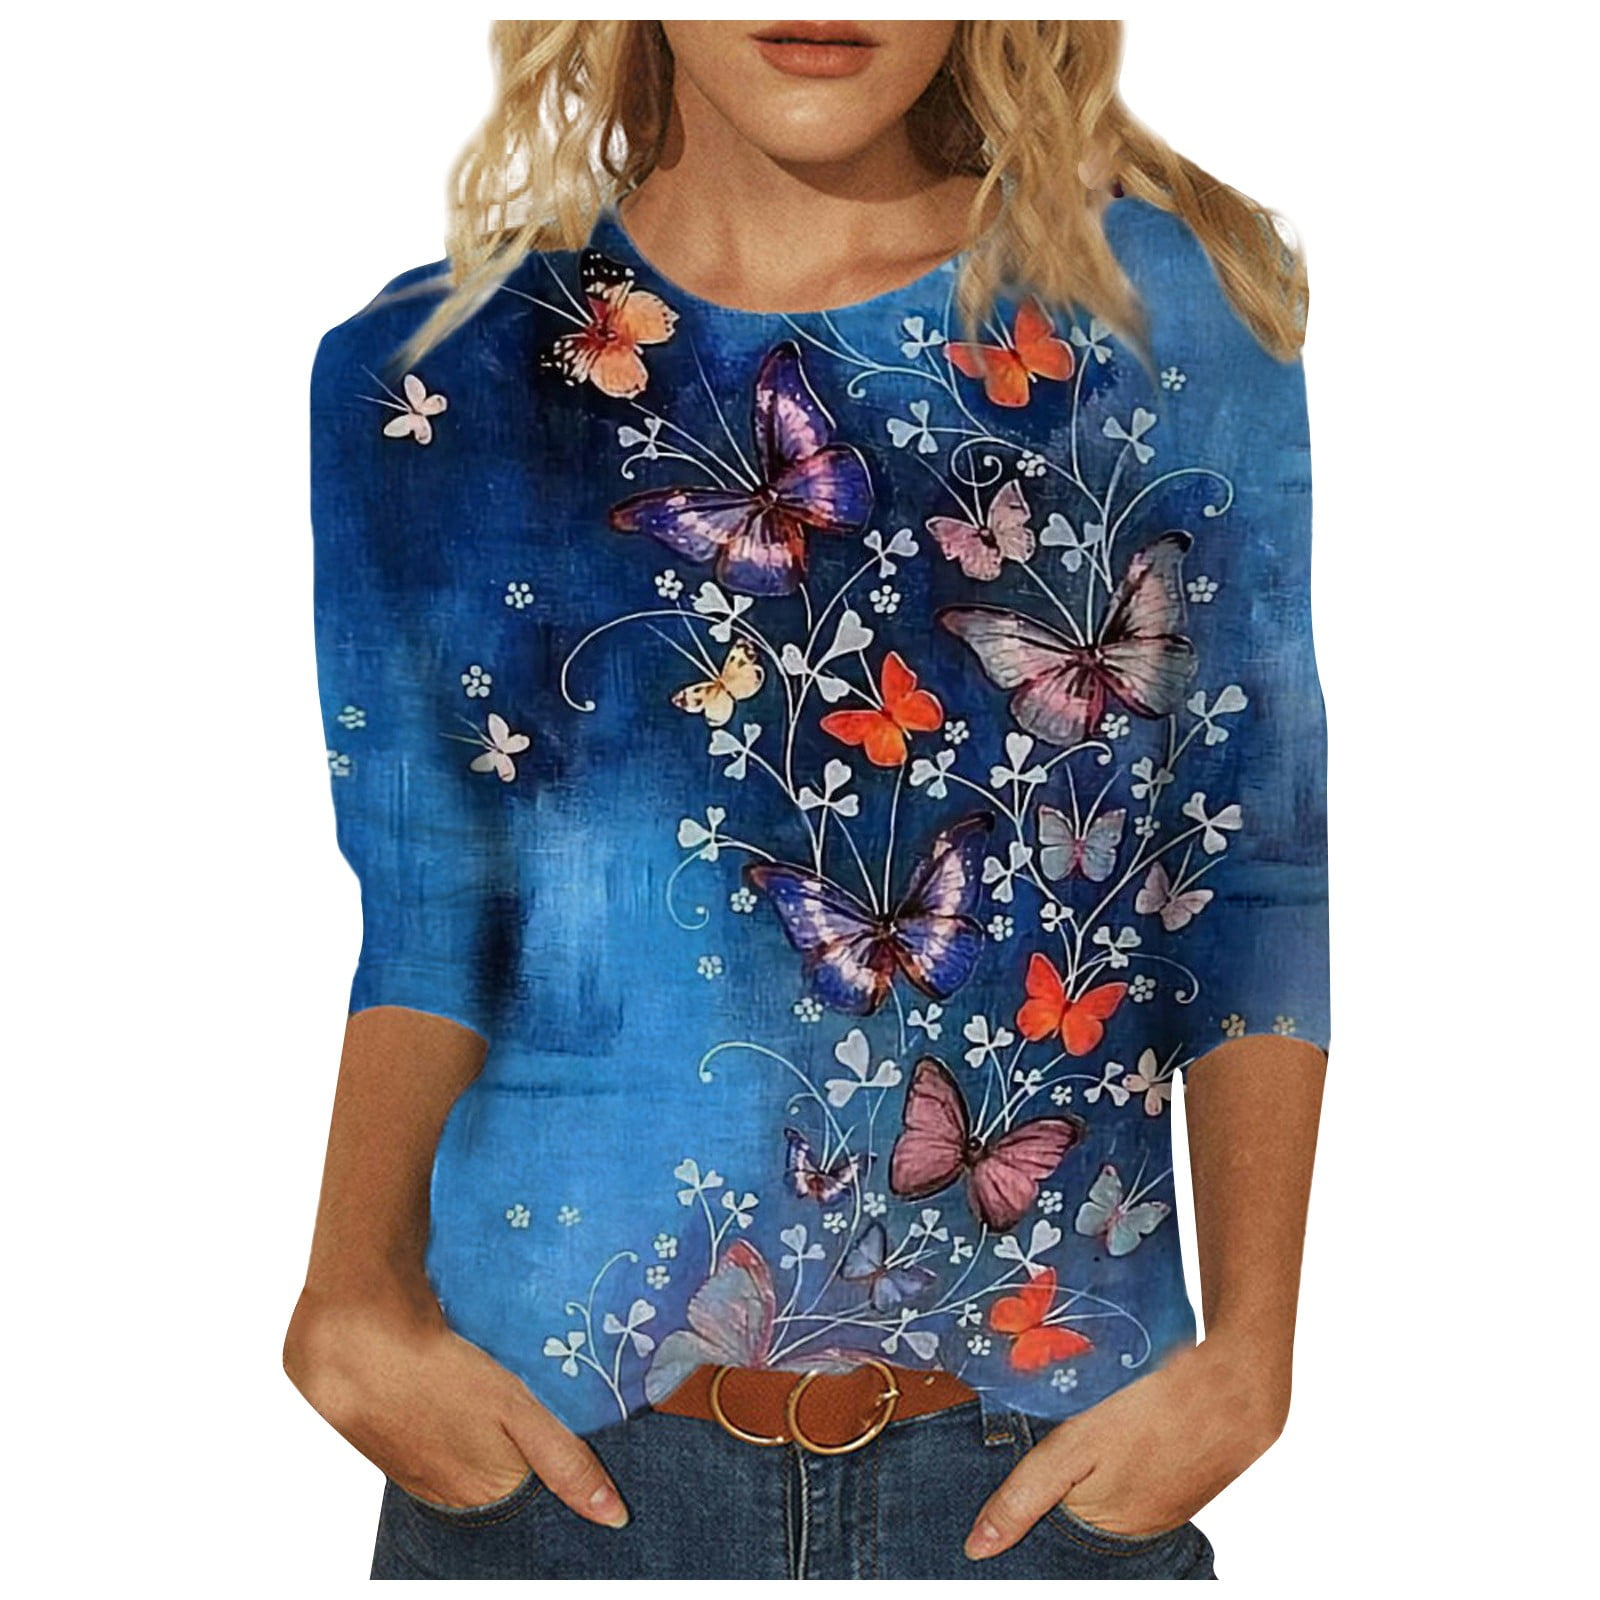 Round Neck Loose Pullover Comfy Soft Blouses Summer Casual Print Plus Size Tops 3/4 Sleeve Shirts for Women 